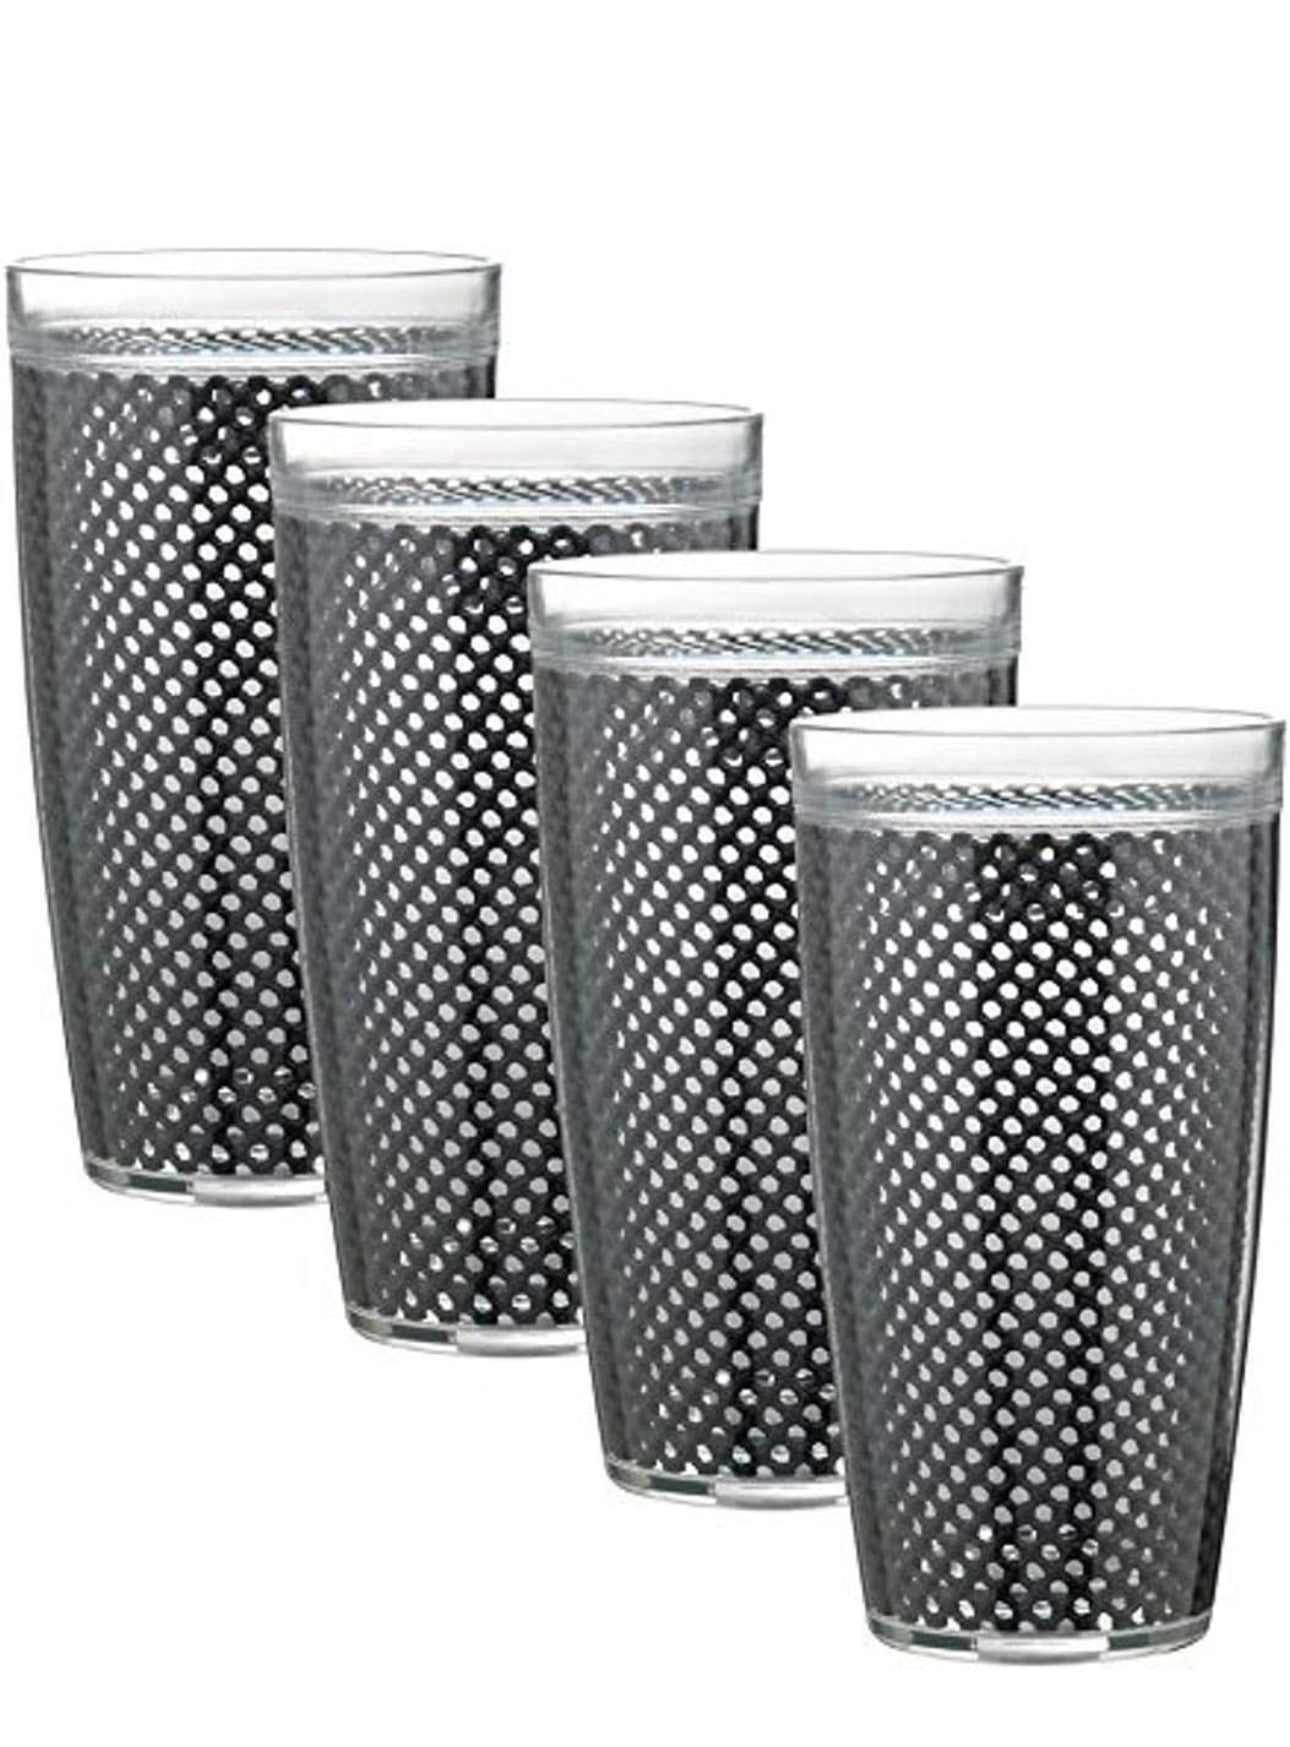 Kraftware The Fishnet Collection Doublewall Drinkware, Set of 3, 22 oz, Black, 4 Count**missing one cup